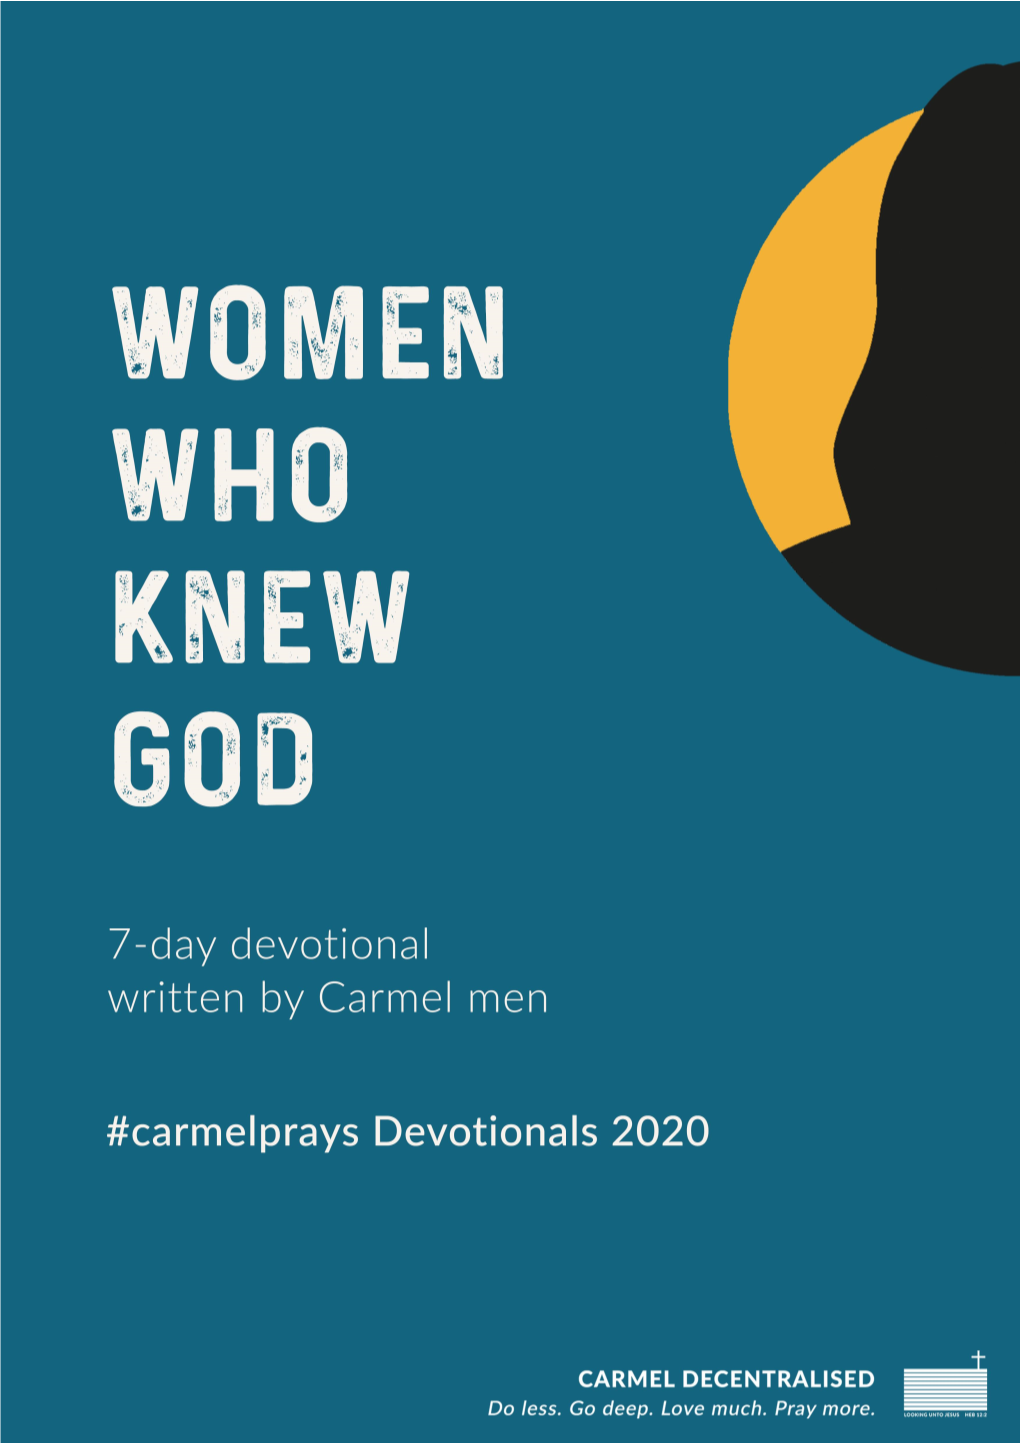 Women Who Knew God’ for the First Week; and the Women from Mount Carmel Will Share Their Thoughts About ‘Men of Faith’ in the Second Week